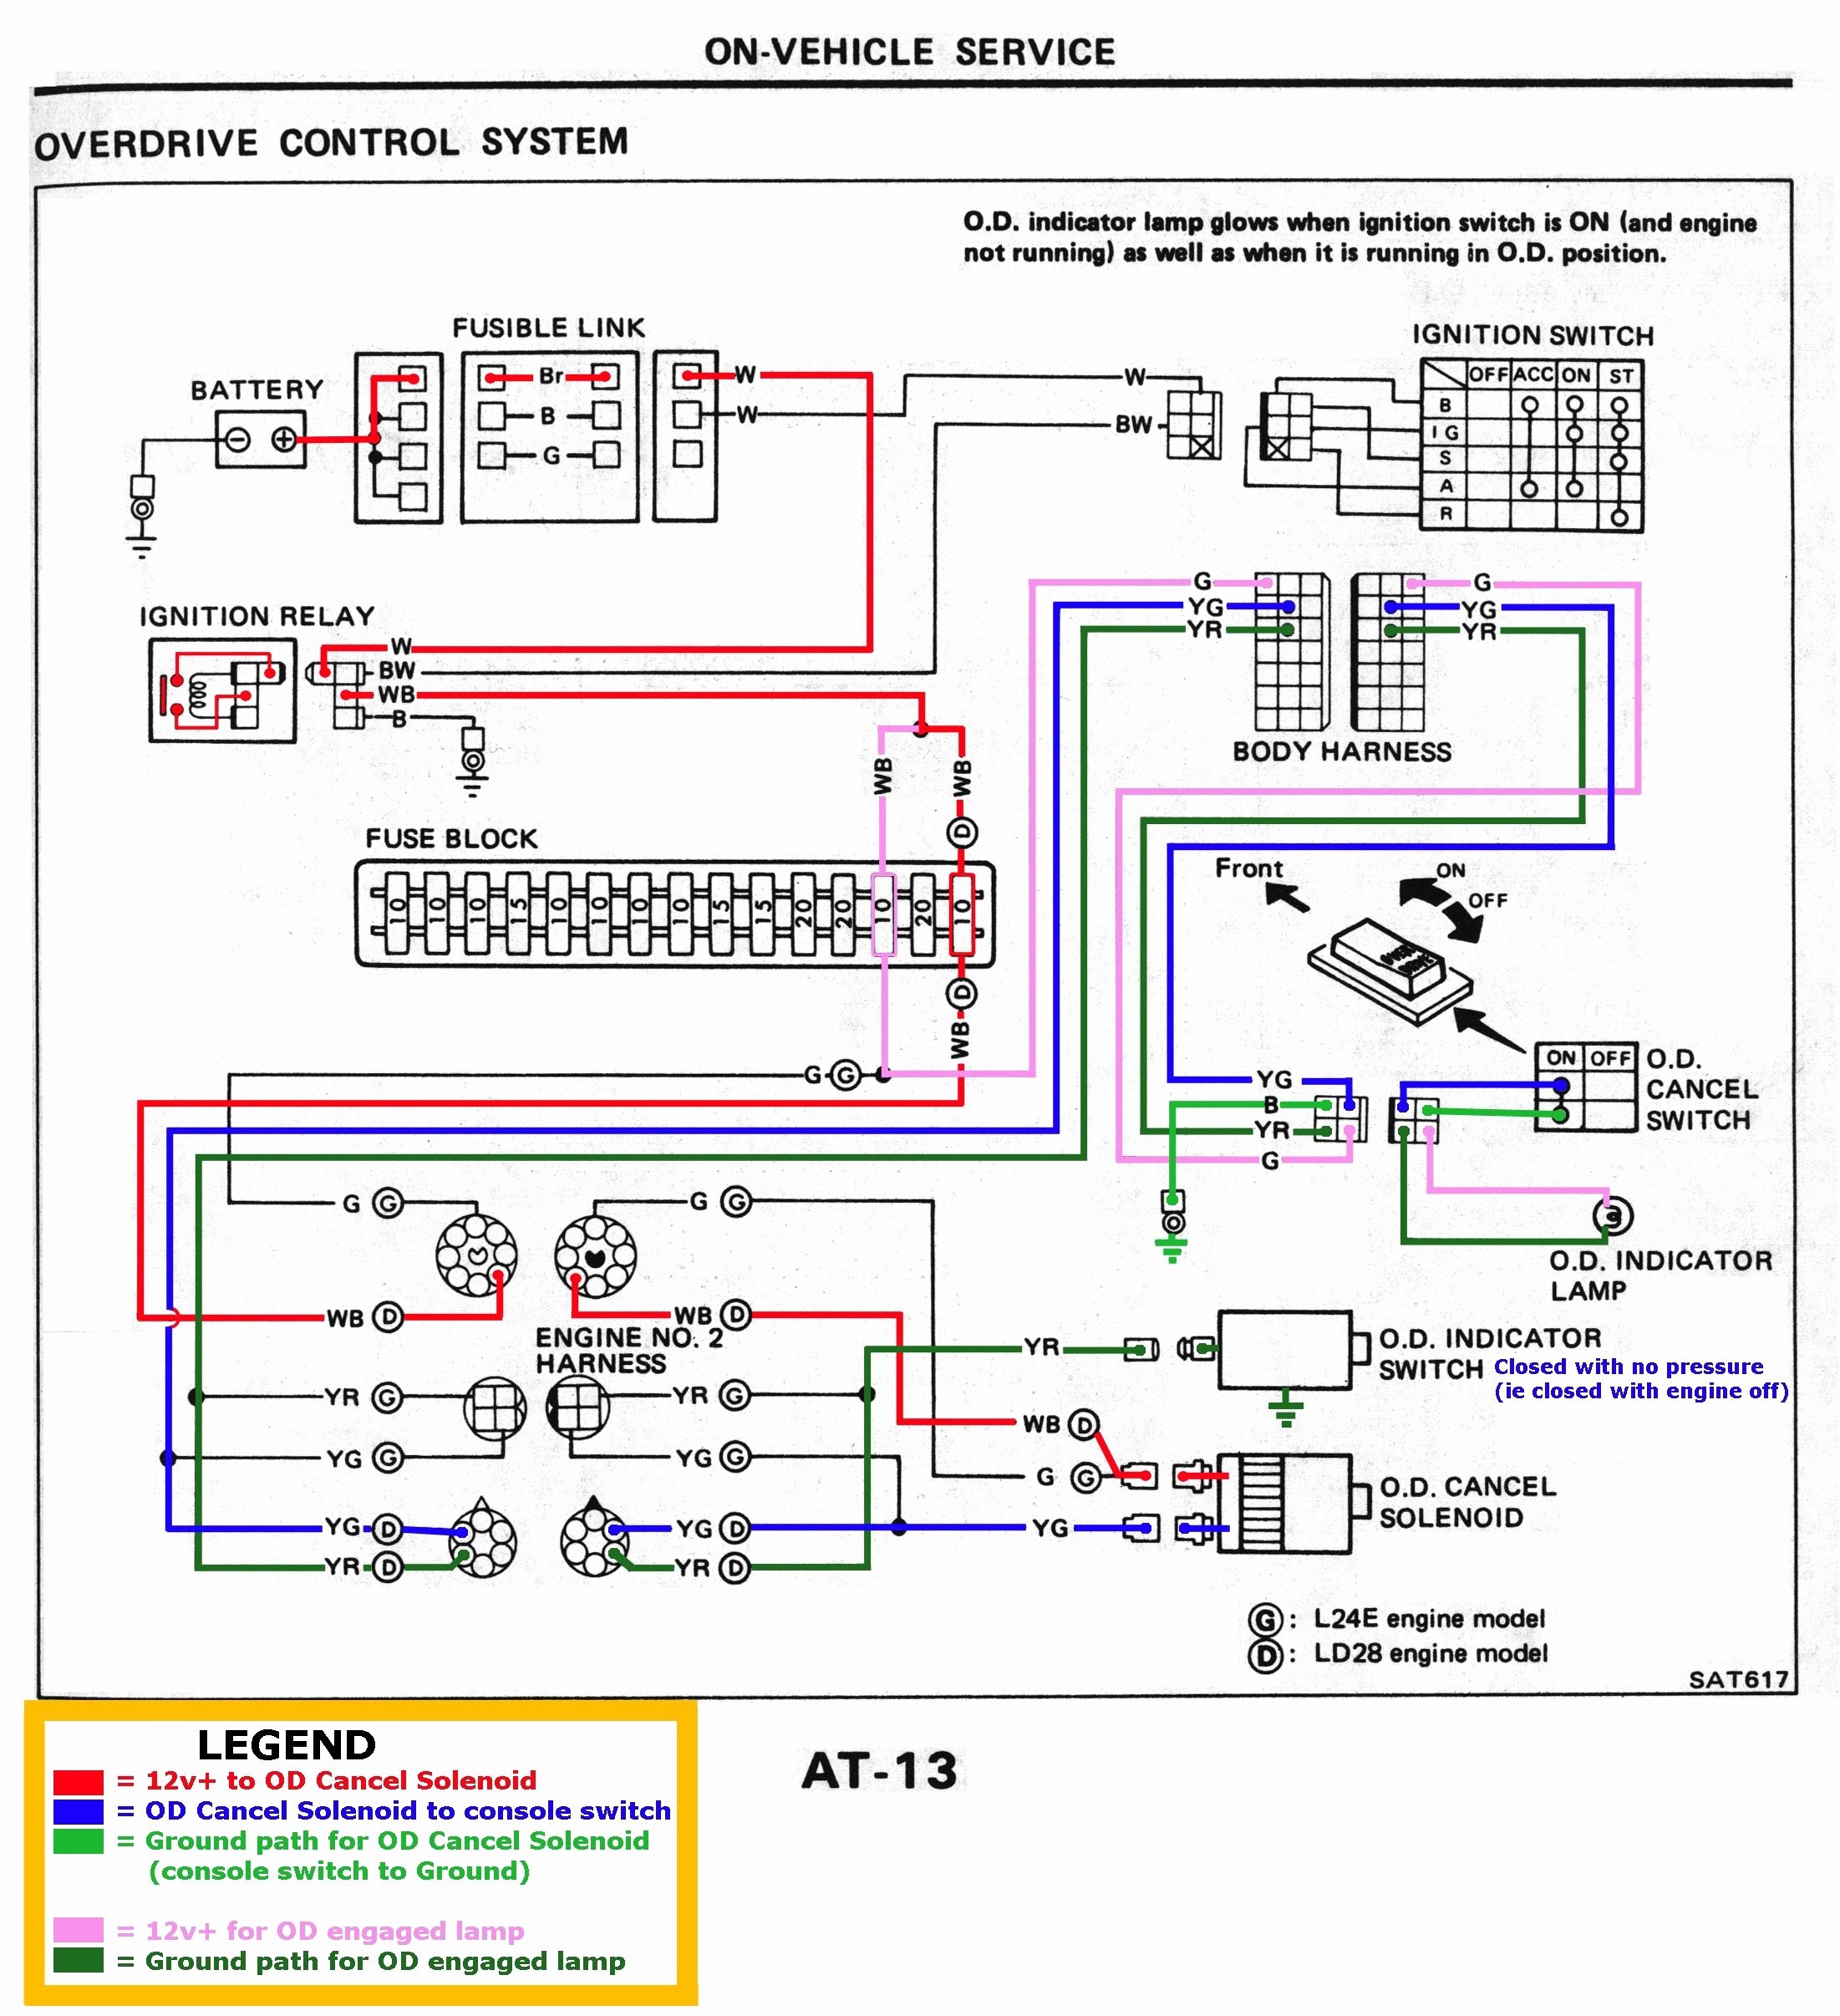 square d relay wiring diagram Collection Oex Relay Wiring Diagram Save Wiring Diagram Square D DOWNLOAD Wiring Diagram